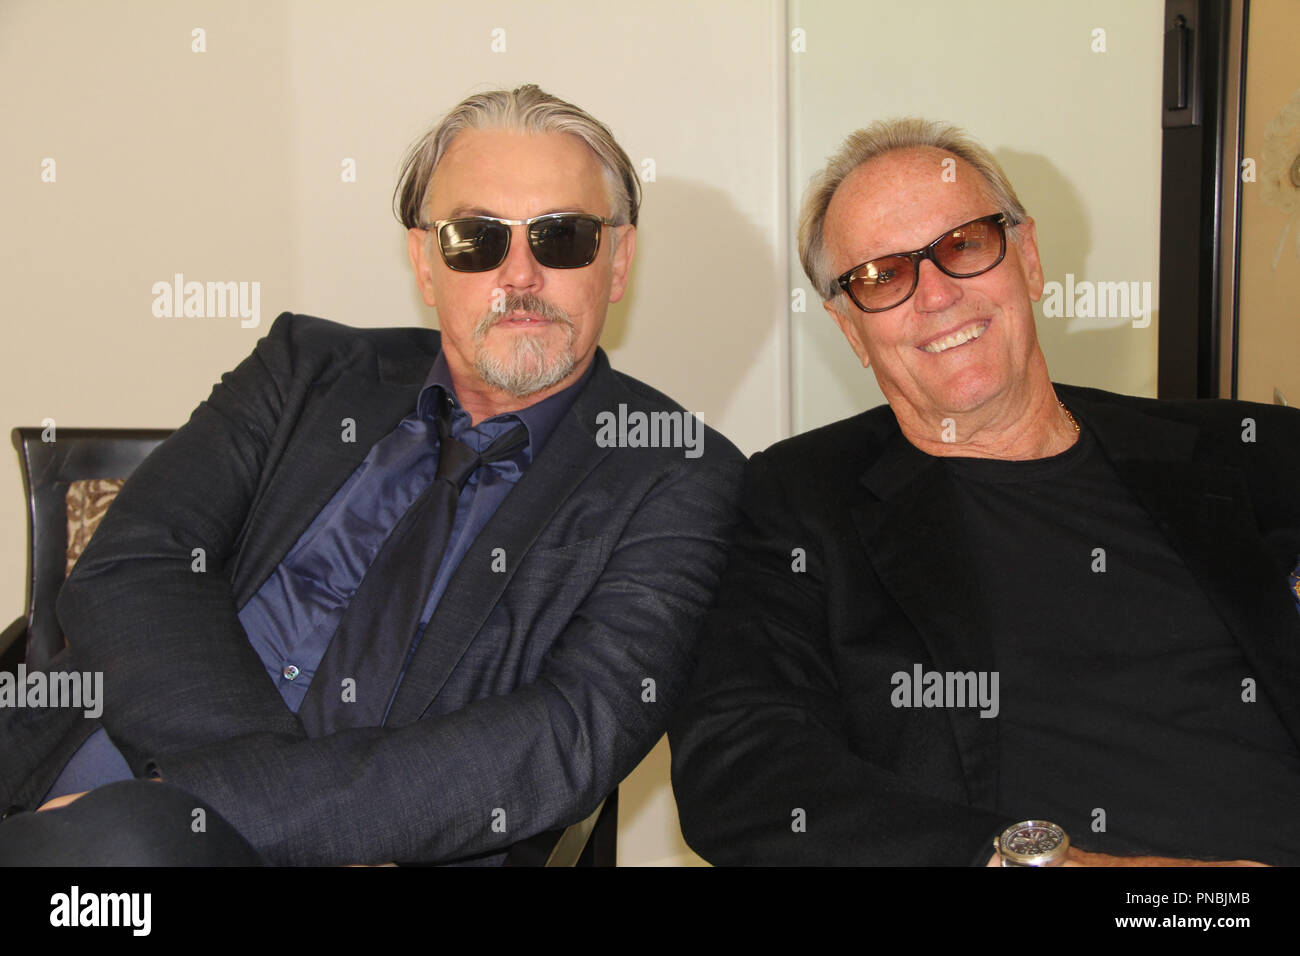 Tommy Flanagan, Peter Fonda  11/14/2017 'The Ballad of Lefty Brown' Photocall held at Four Seasons Los Angeles at Beverly Hills in Los Angeles, CA Photo by Izumi Hasegawa / HNW / PictureLux Stock Photo